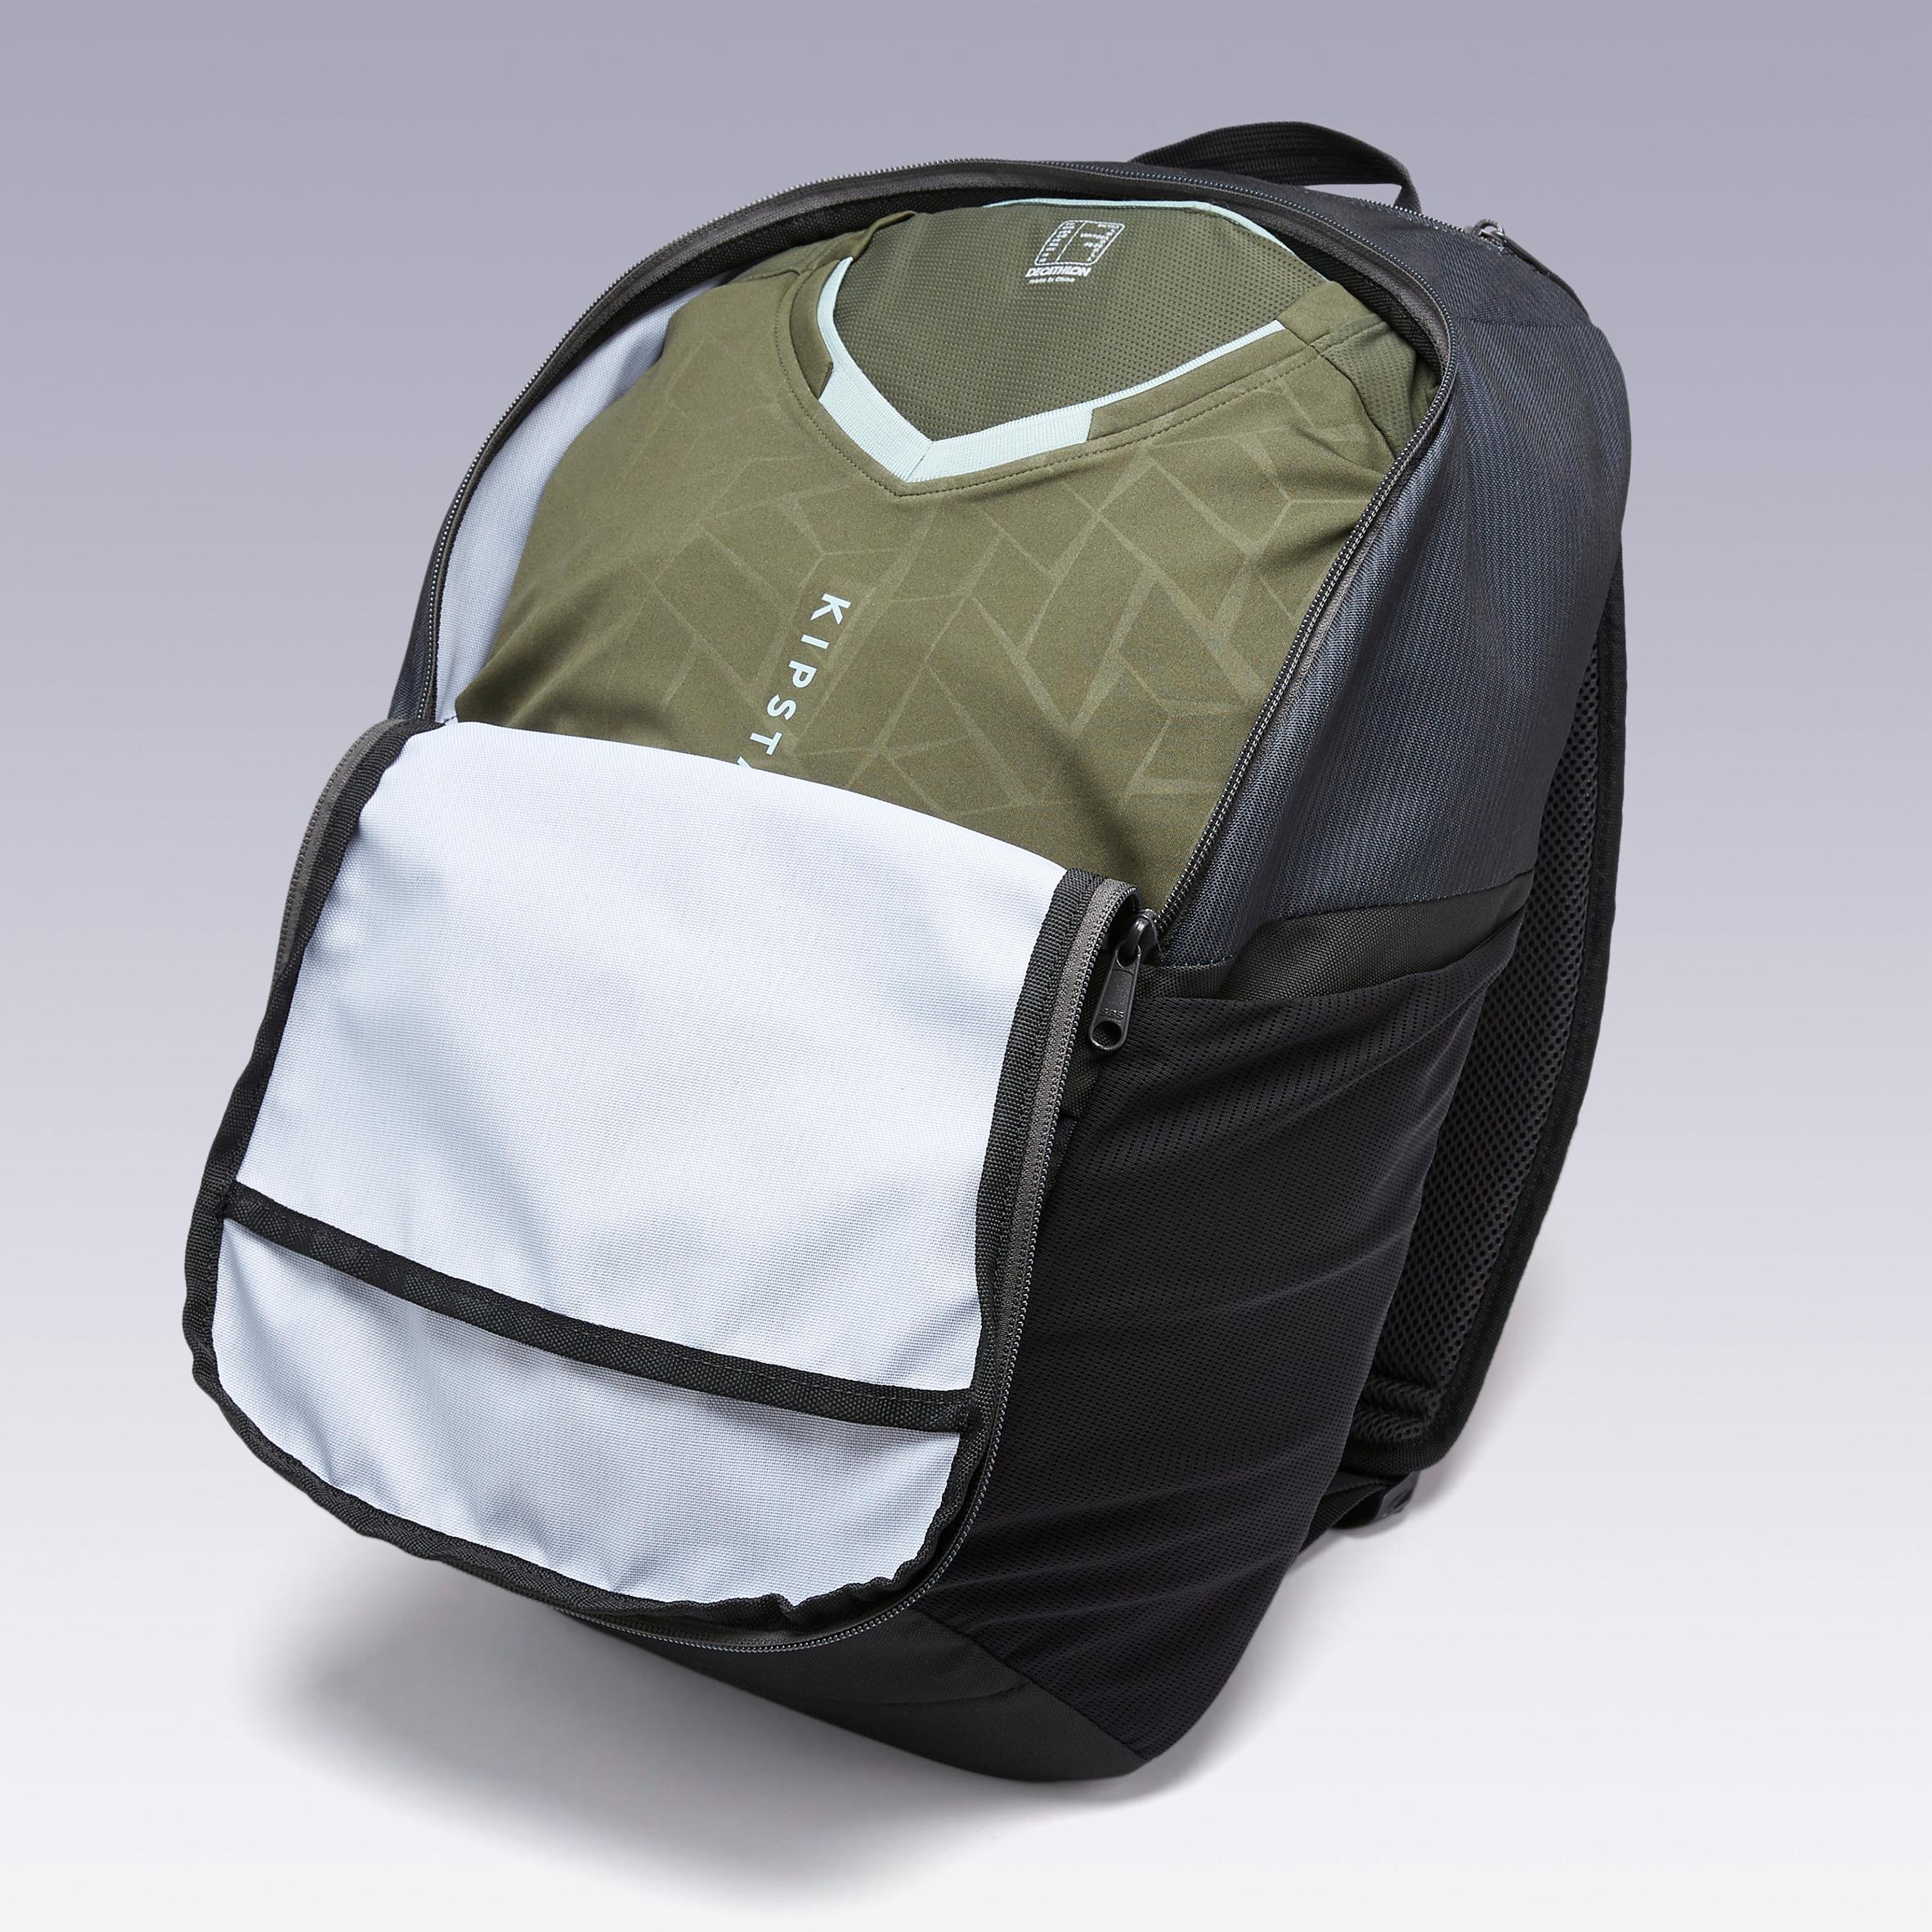 Buy Sports Backpack With Laptop Compartment 25L Navy Blue Online | Decathlon